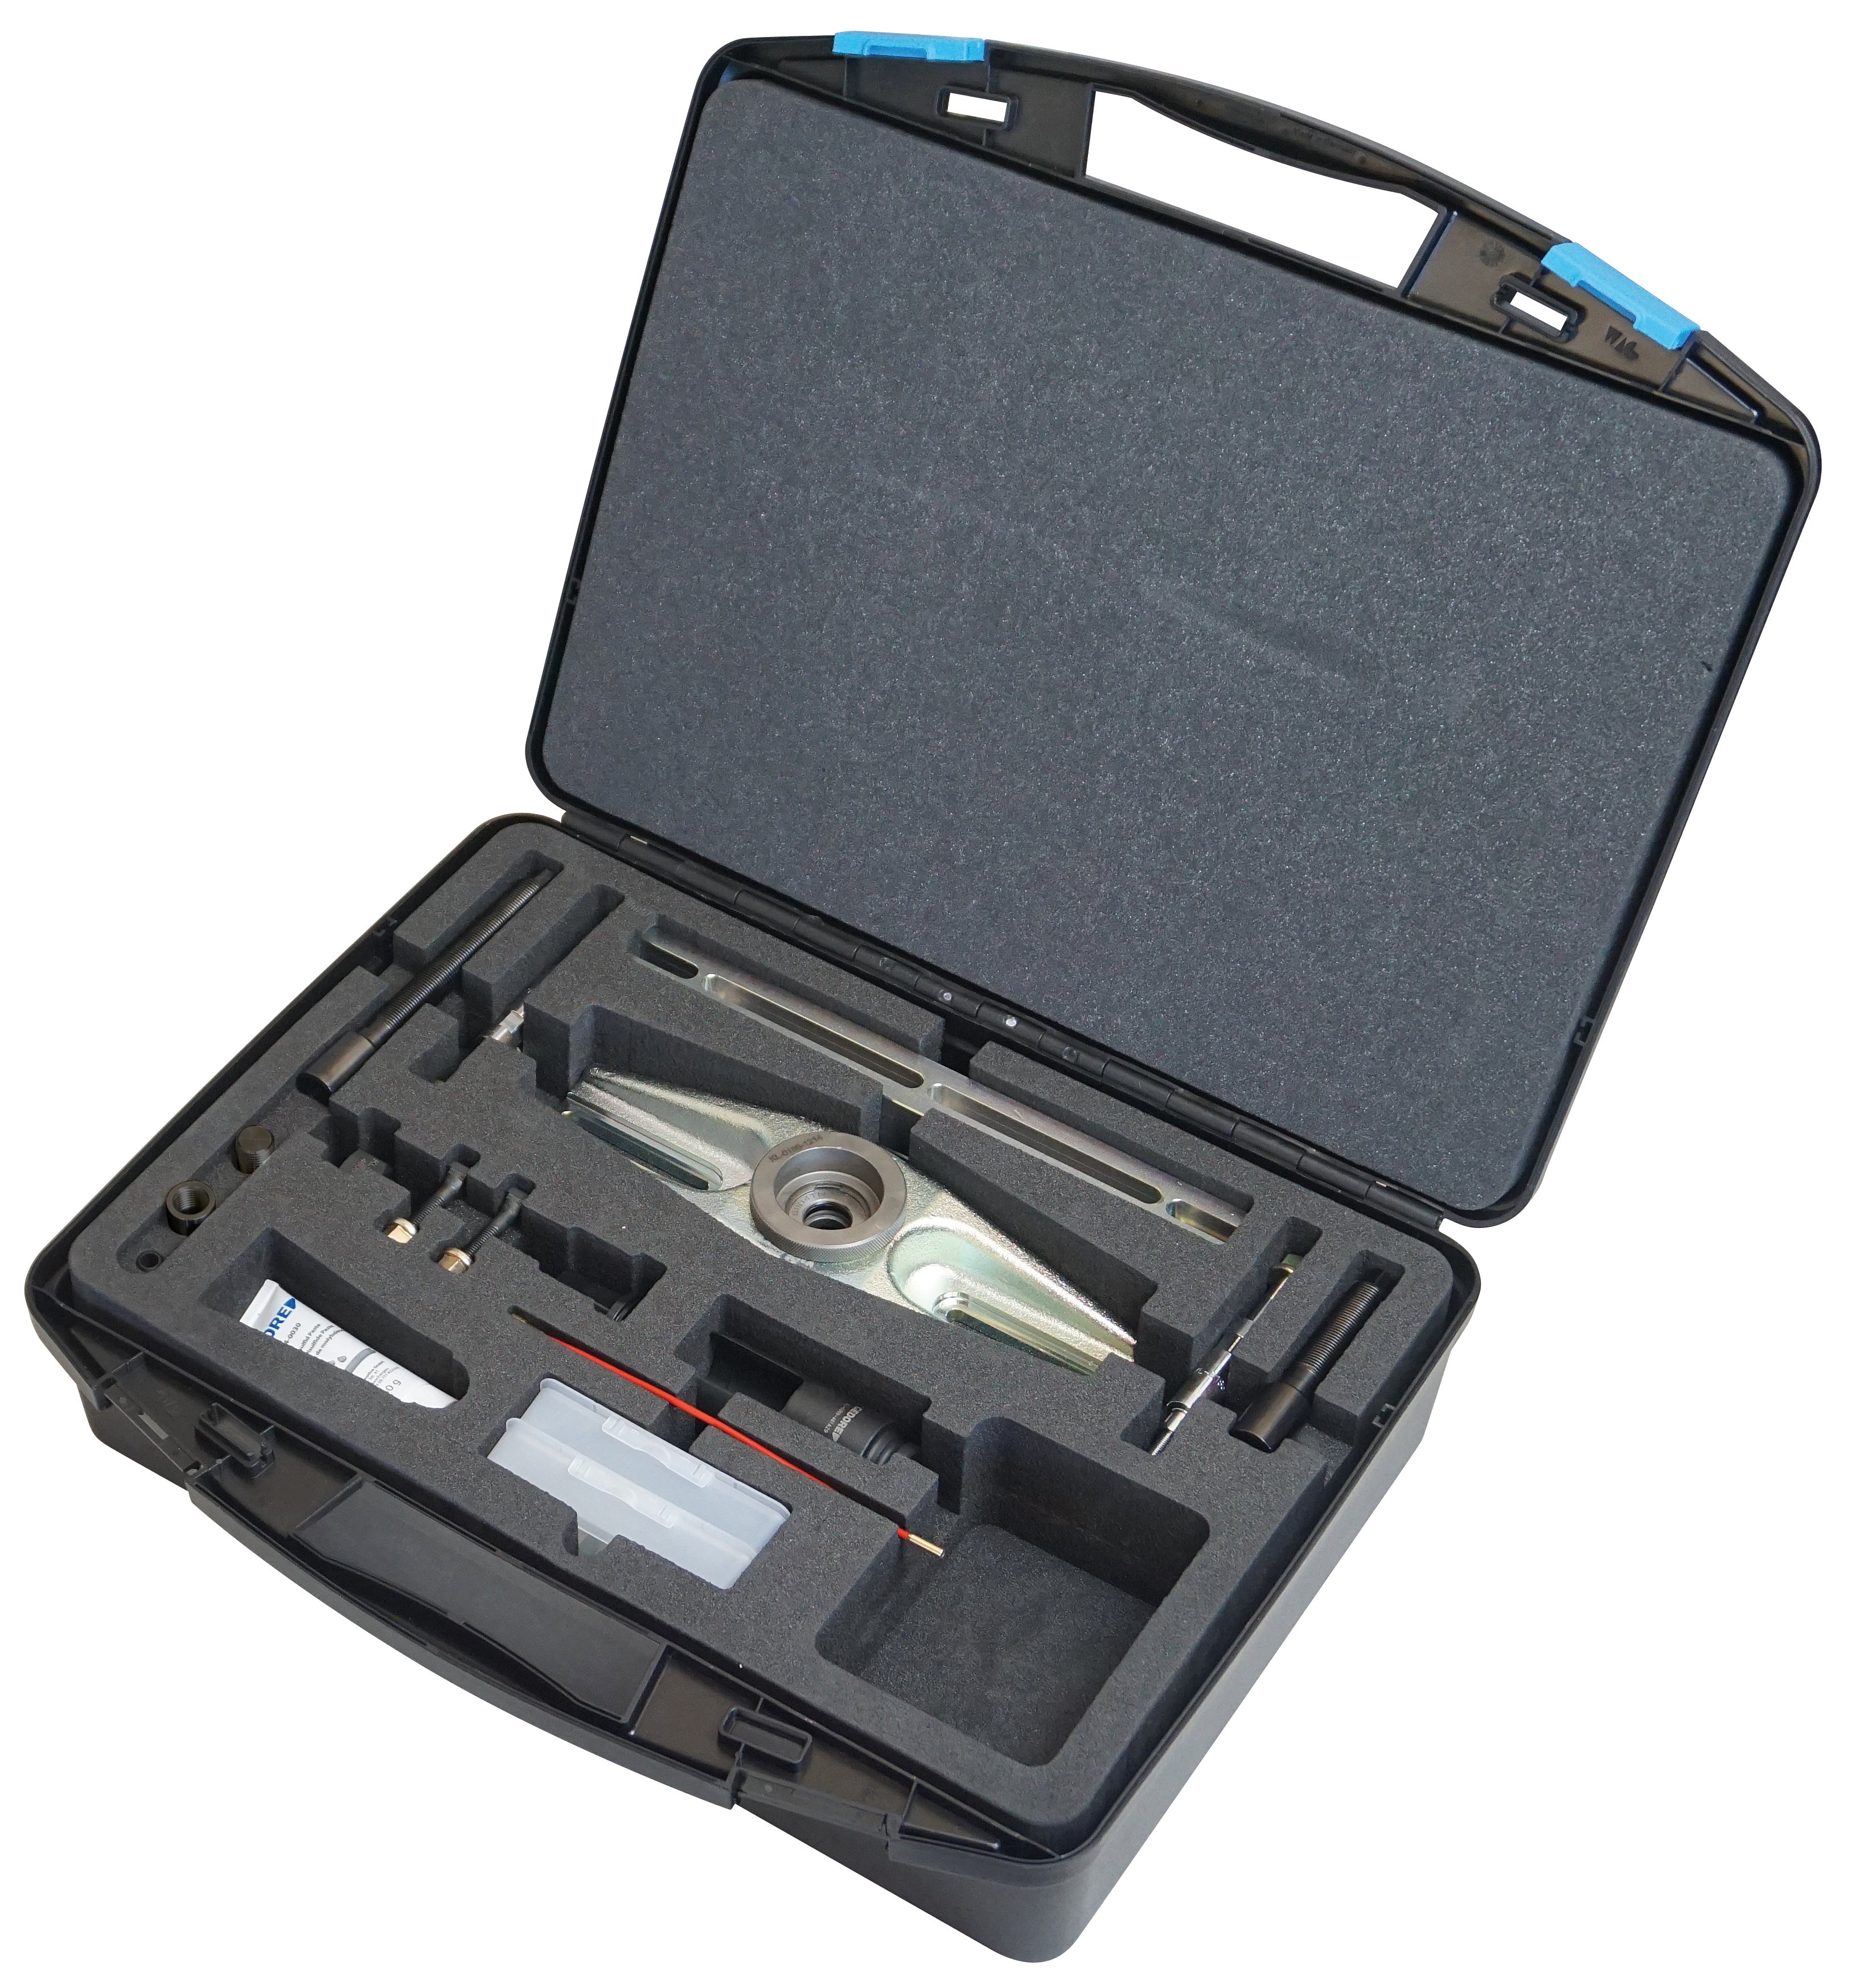 Gedore injector puller kit - universal application view of kit sitting in open case